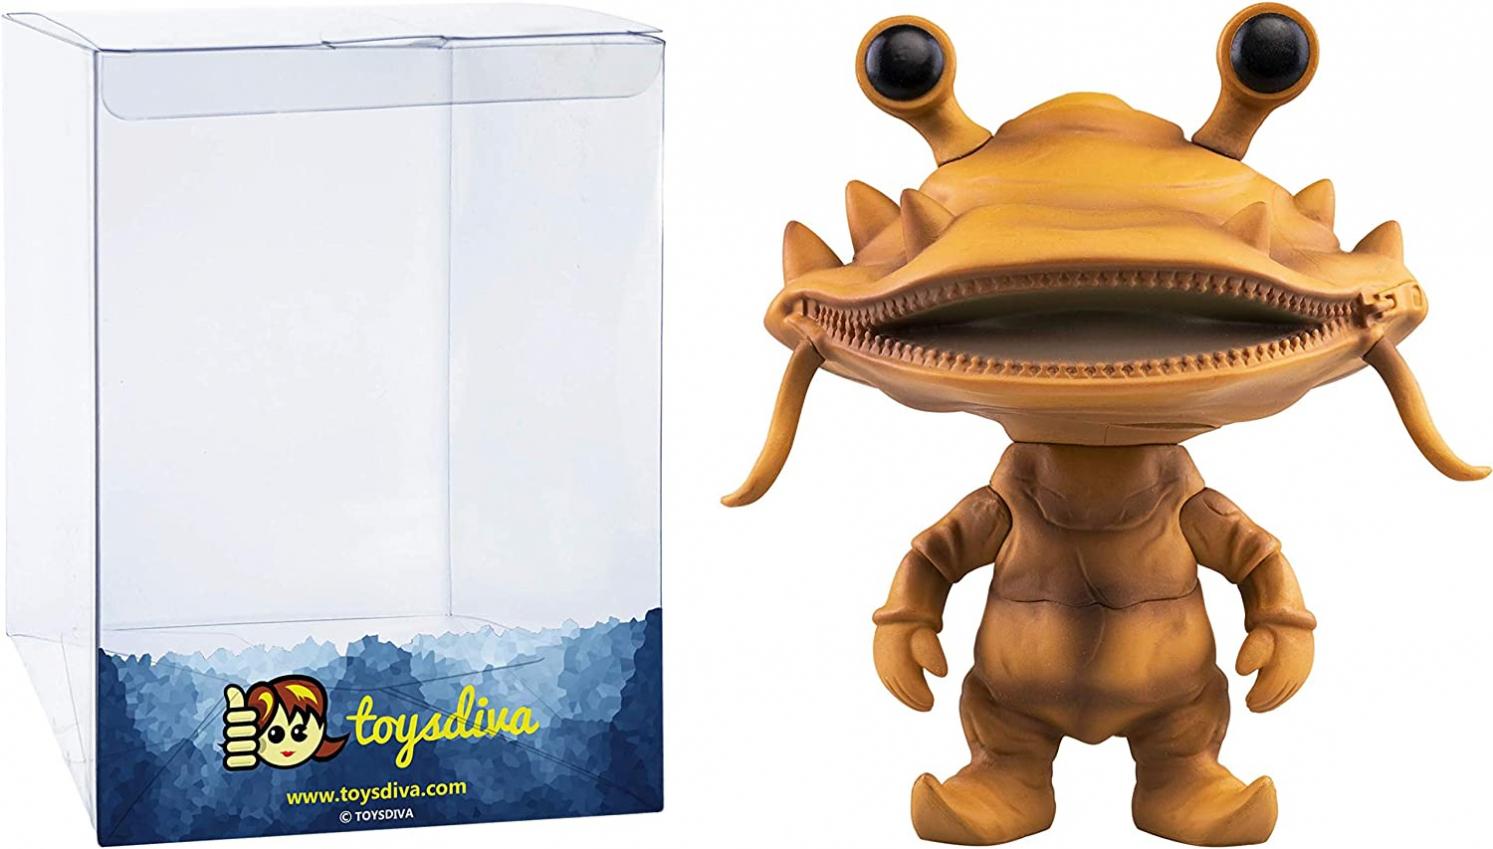 Kanegon: Funk o Pop! TV Vinyl Figure Bundle with 1 Compatible 'ToysDiva' Graphic Protector (768 - 39223 - B)